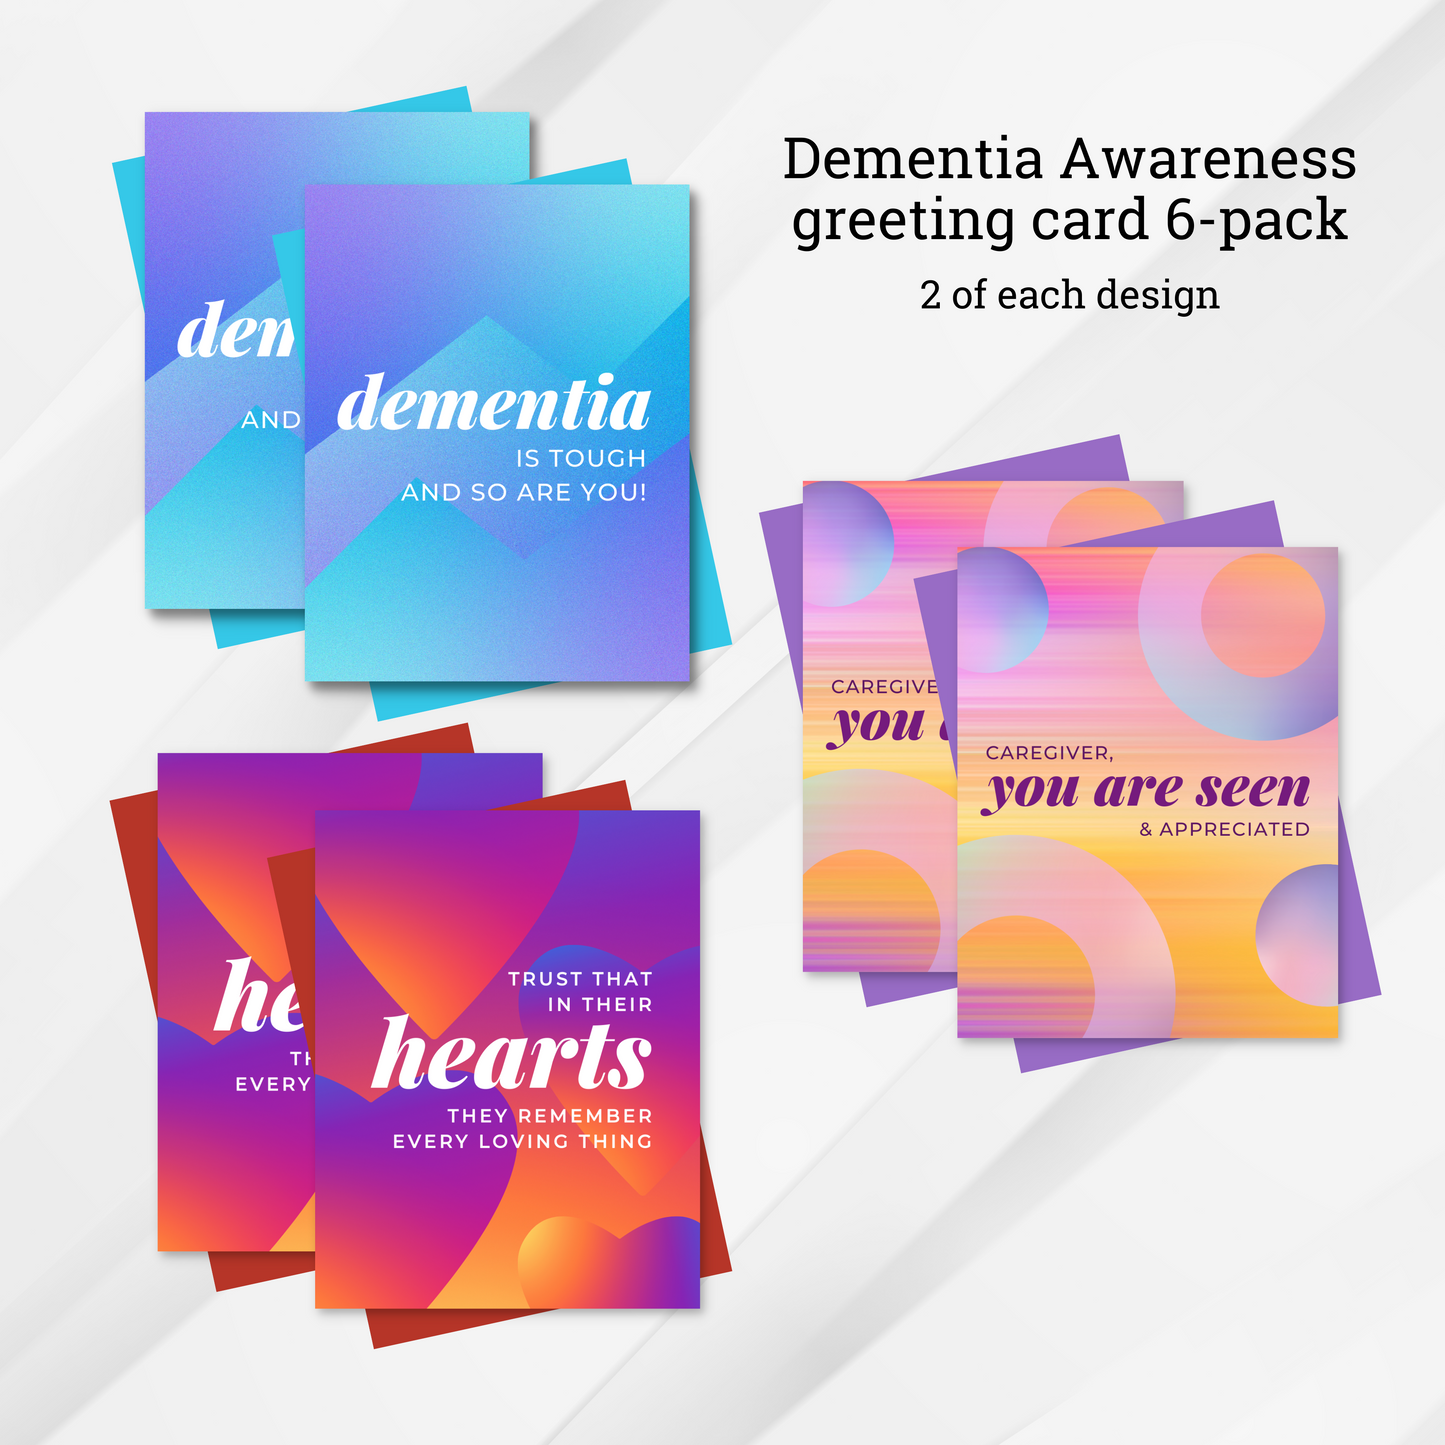 Trust in their hearts they remember, Dementia awareness card